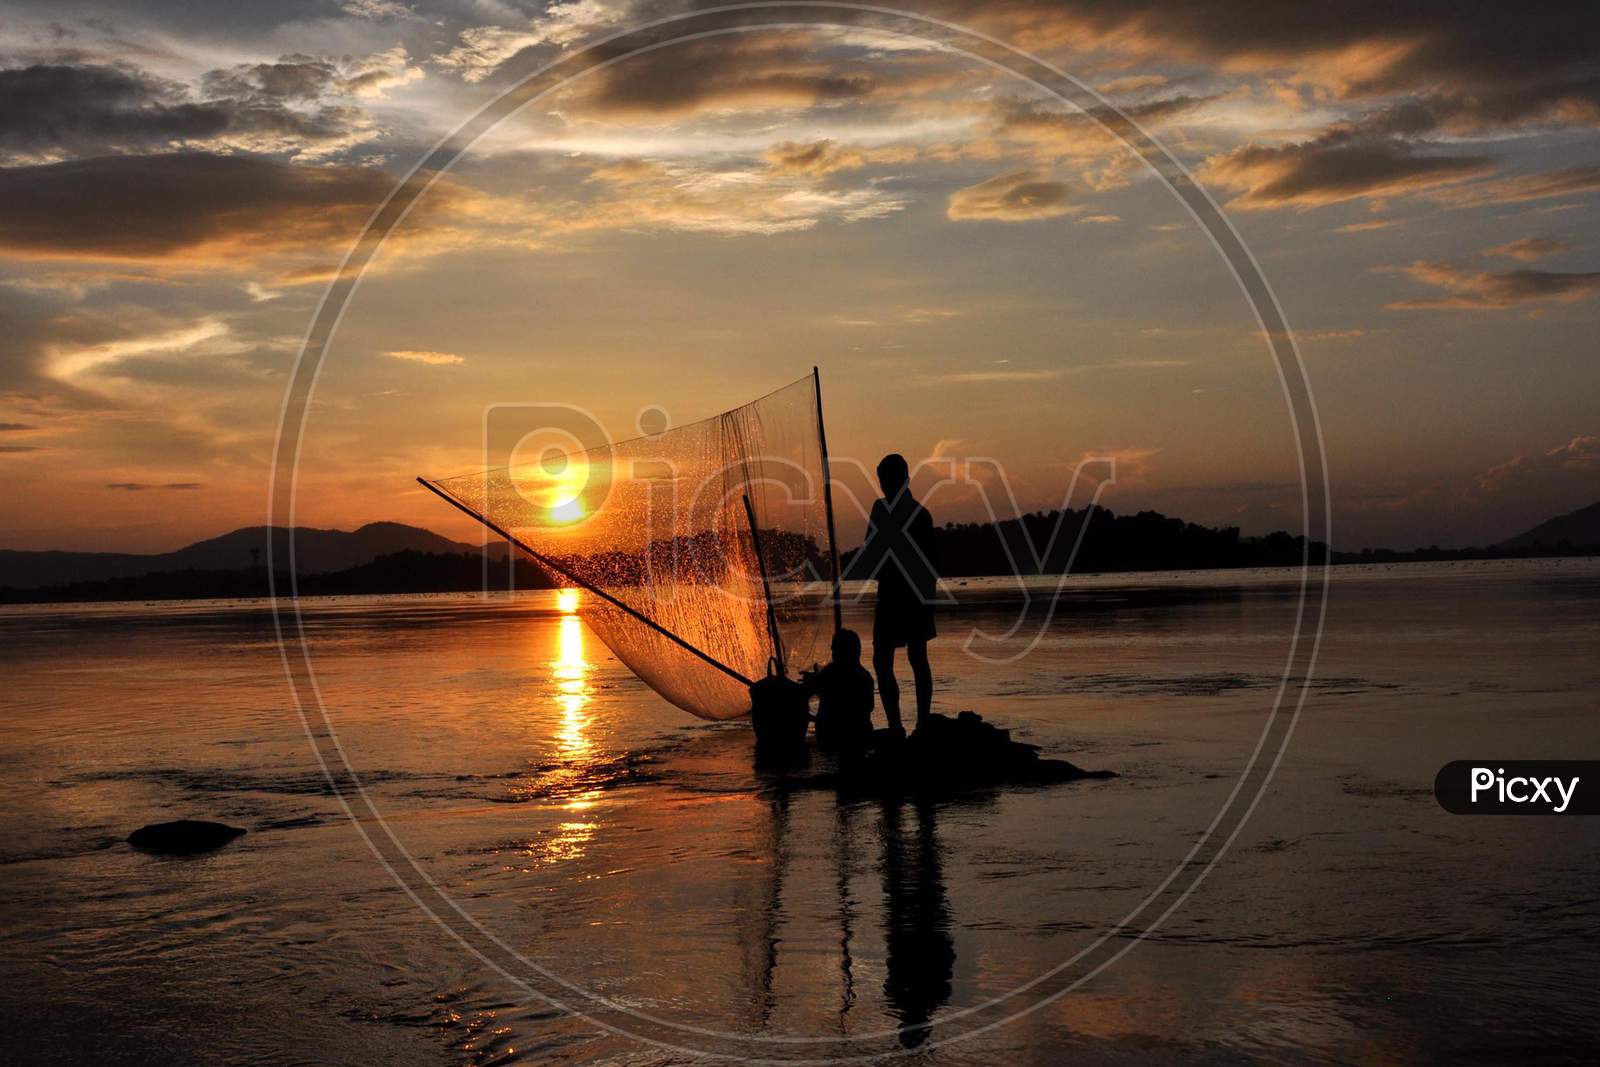 Fisherman Catches Fish At The Banks Of The Brahmaputra River  During Sunset In Guwahati, India